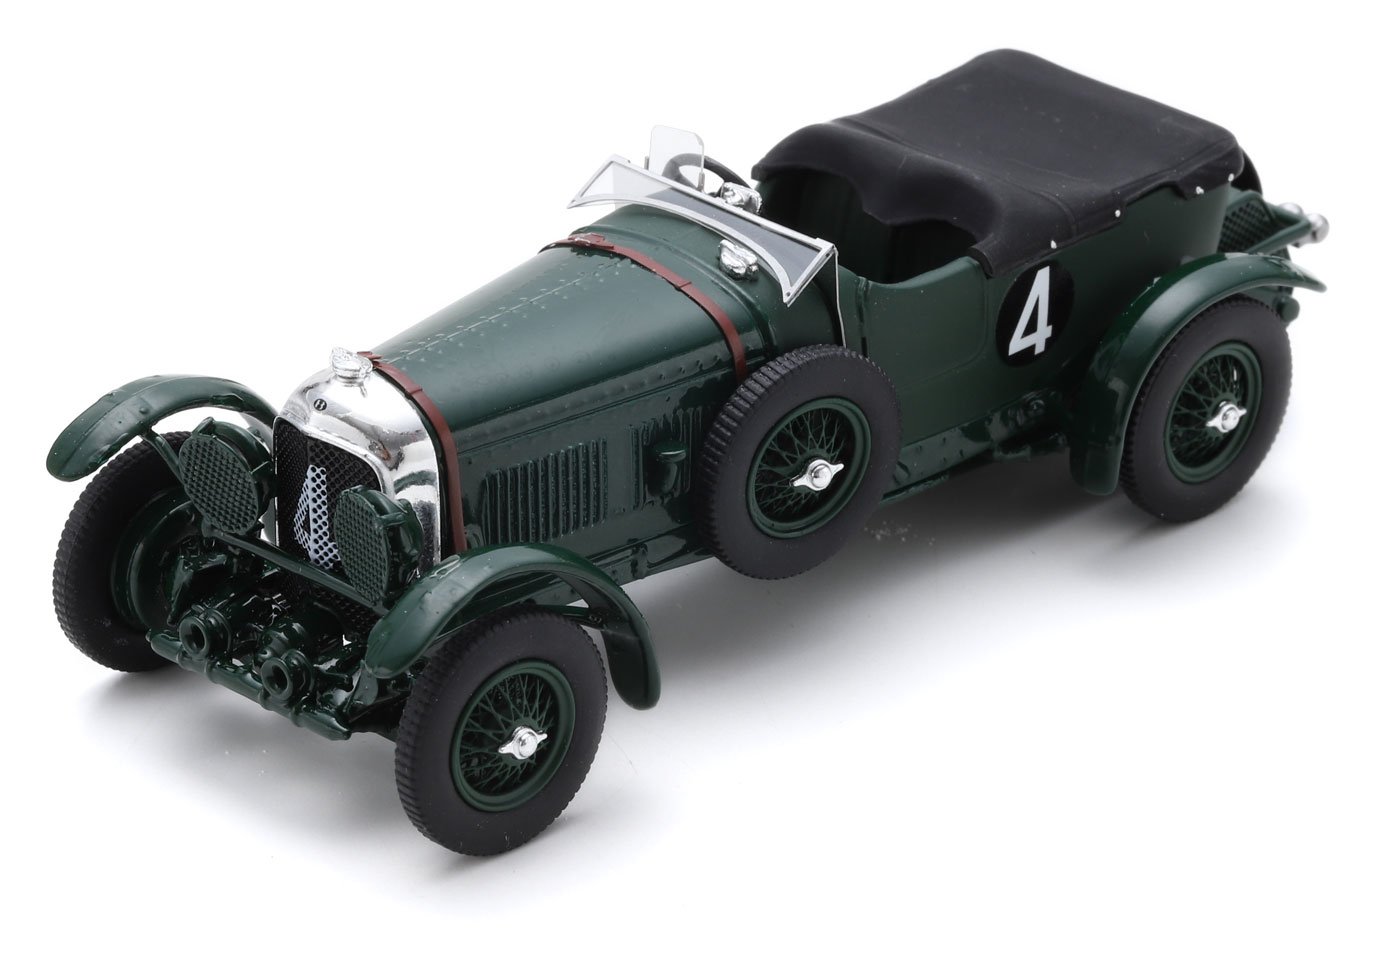 Spark 1:18 1930 Le Mans winning Bentley Speed Six diecast model car review